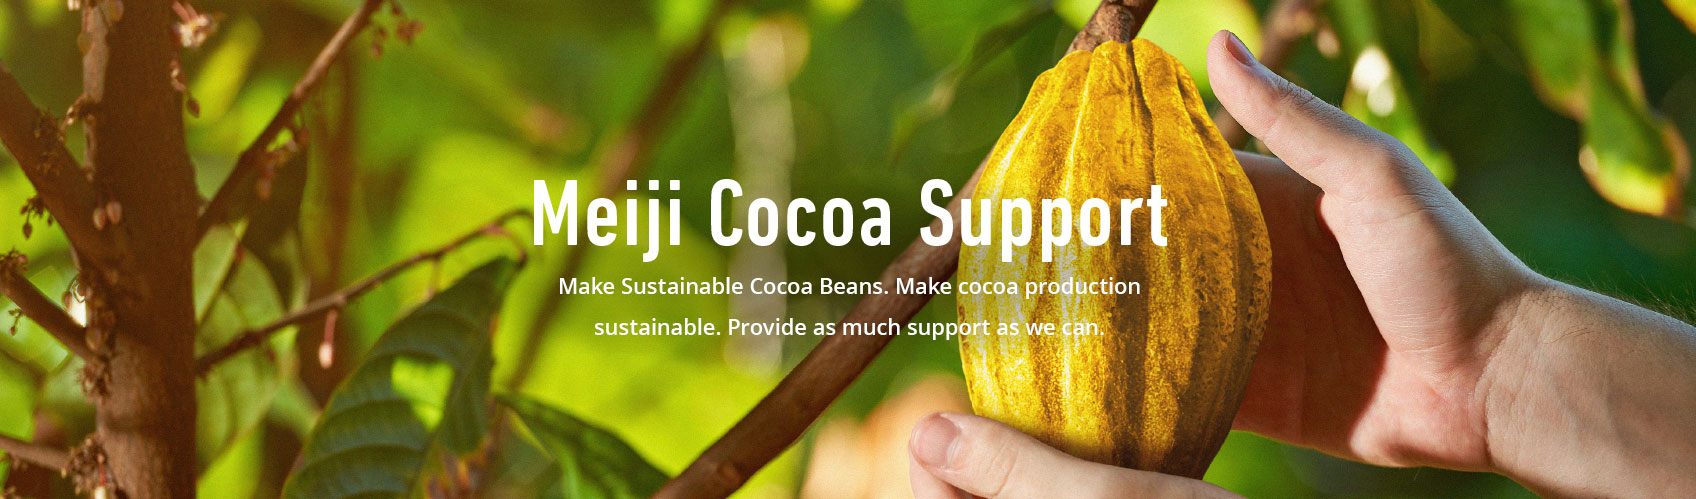 Meiji Cocoa Support Make Sustainable Cocoa Beans. Make cocoa production sustainable. Provide as much support as we can.